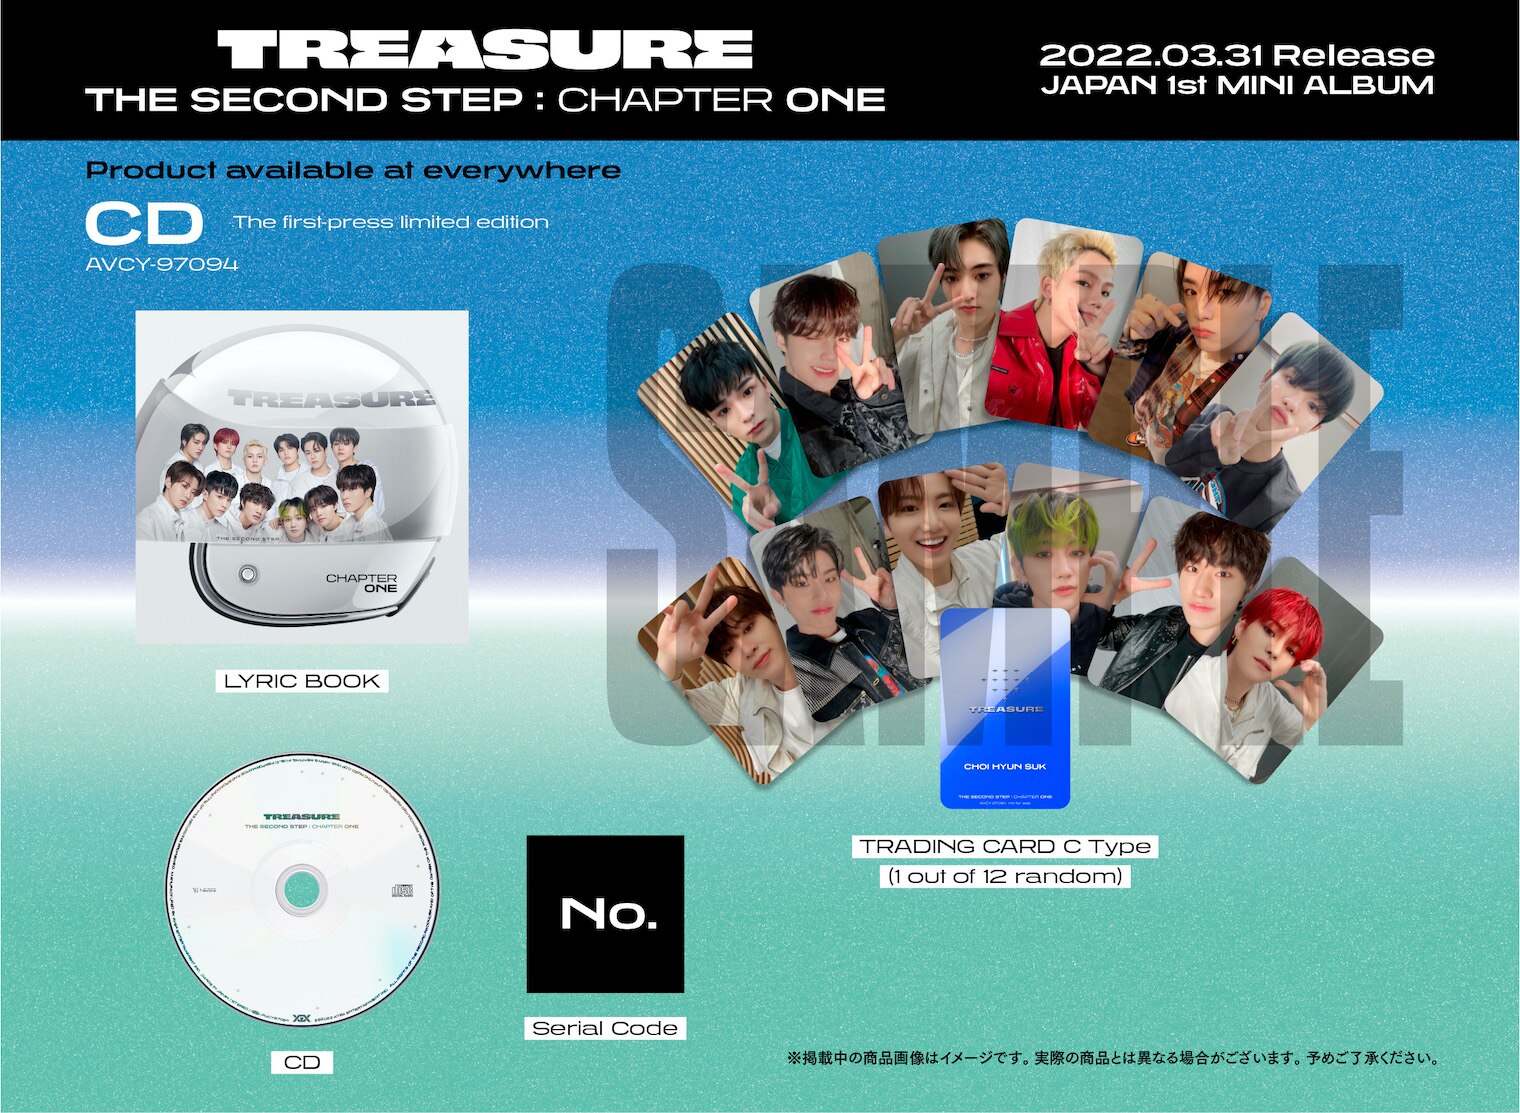 TREASURE 's long-awaited Japan First Mini Album will be released 